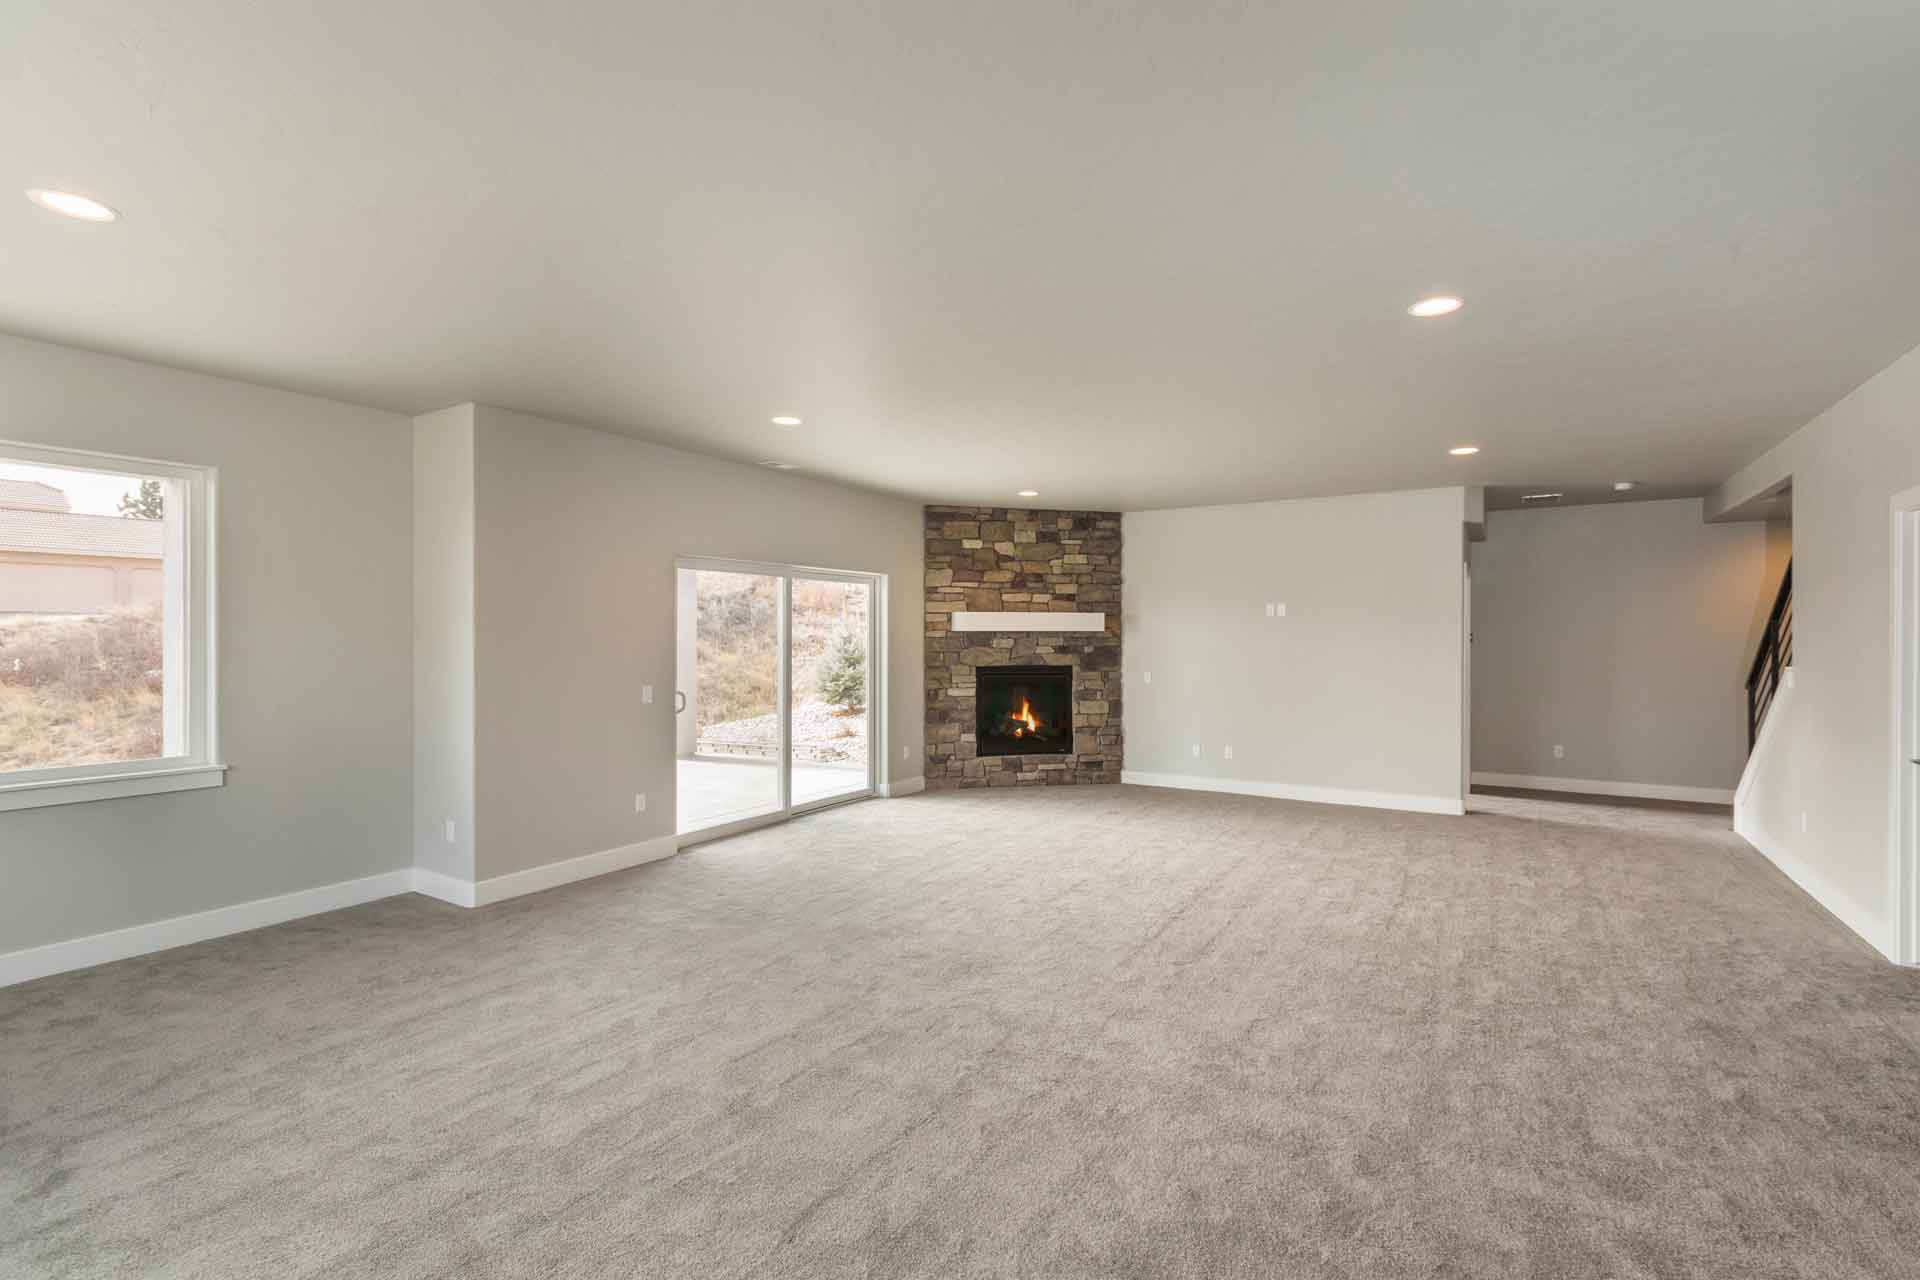 An empty basement with tan carpeting, grey walls and a fireplace